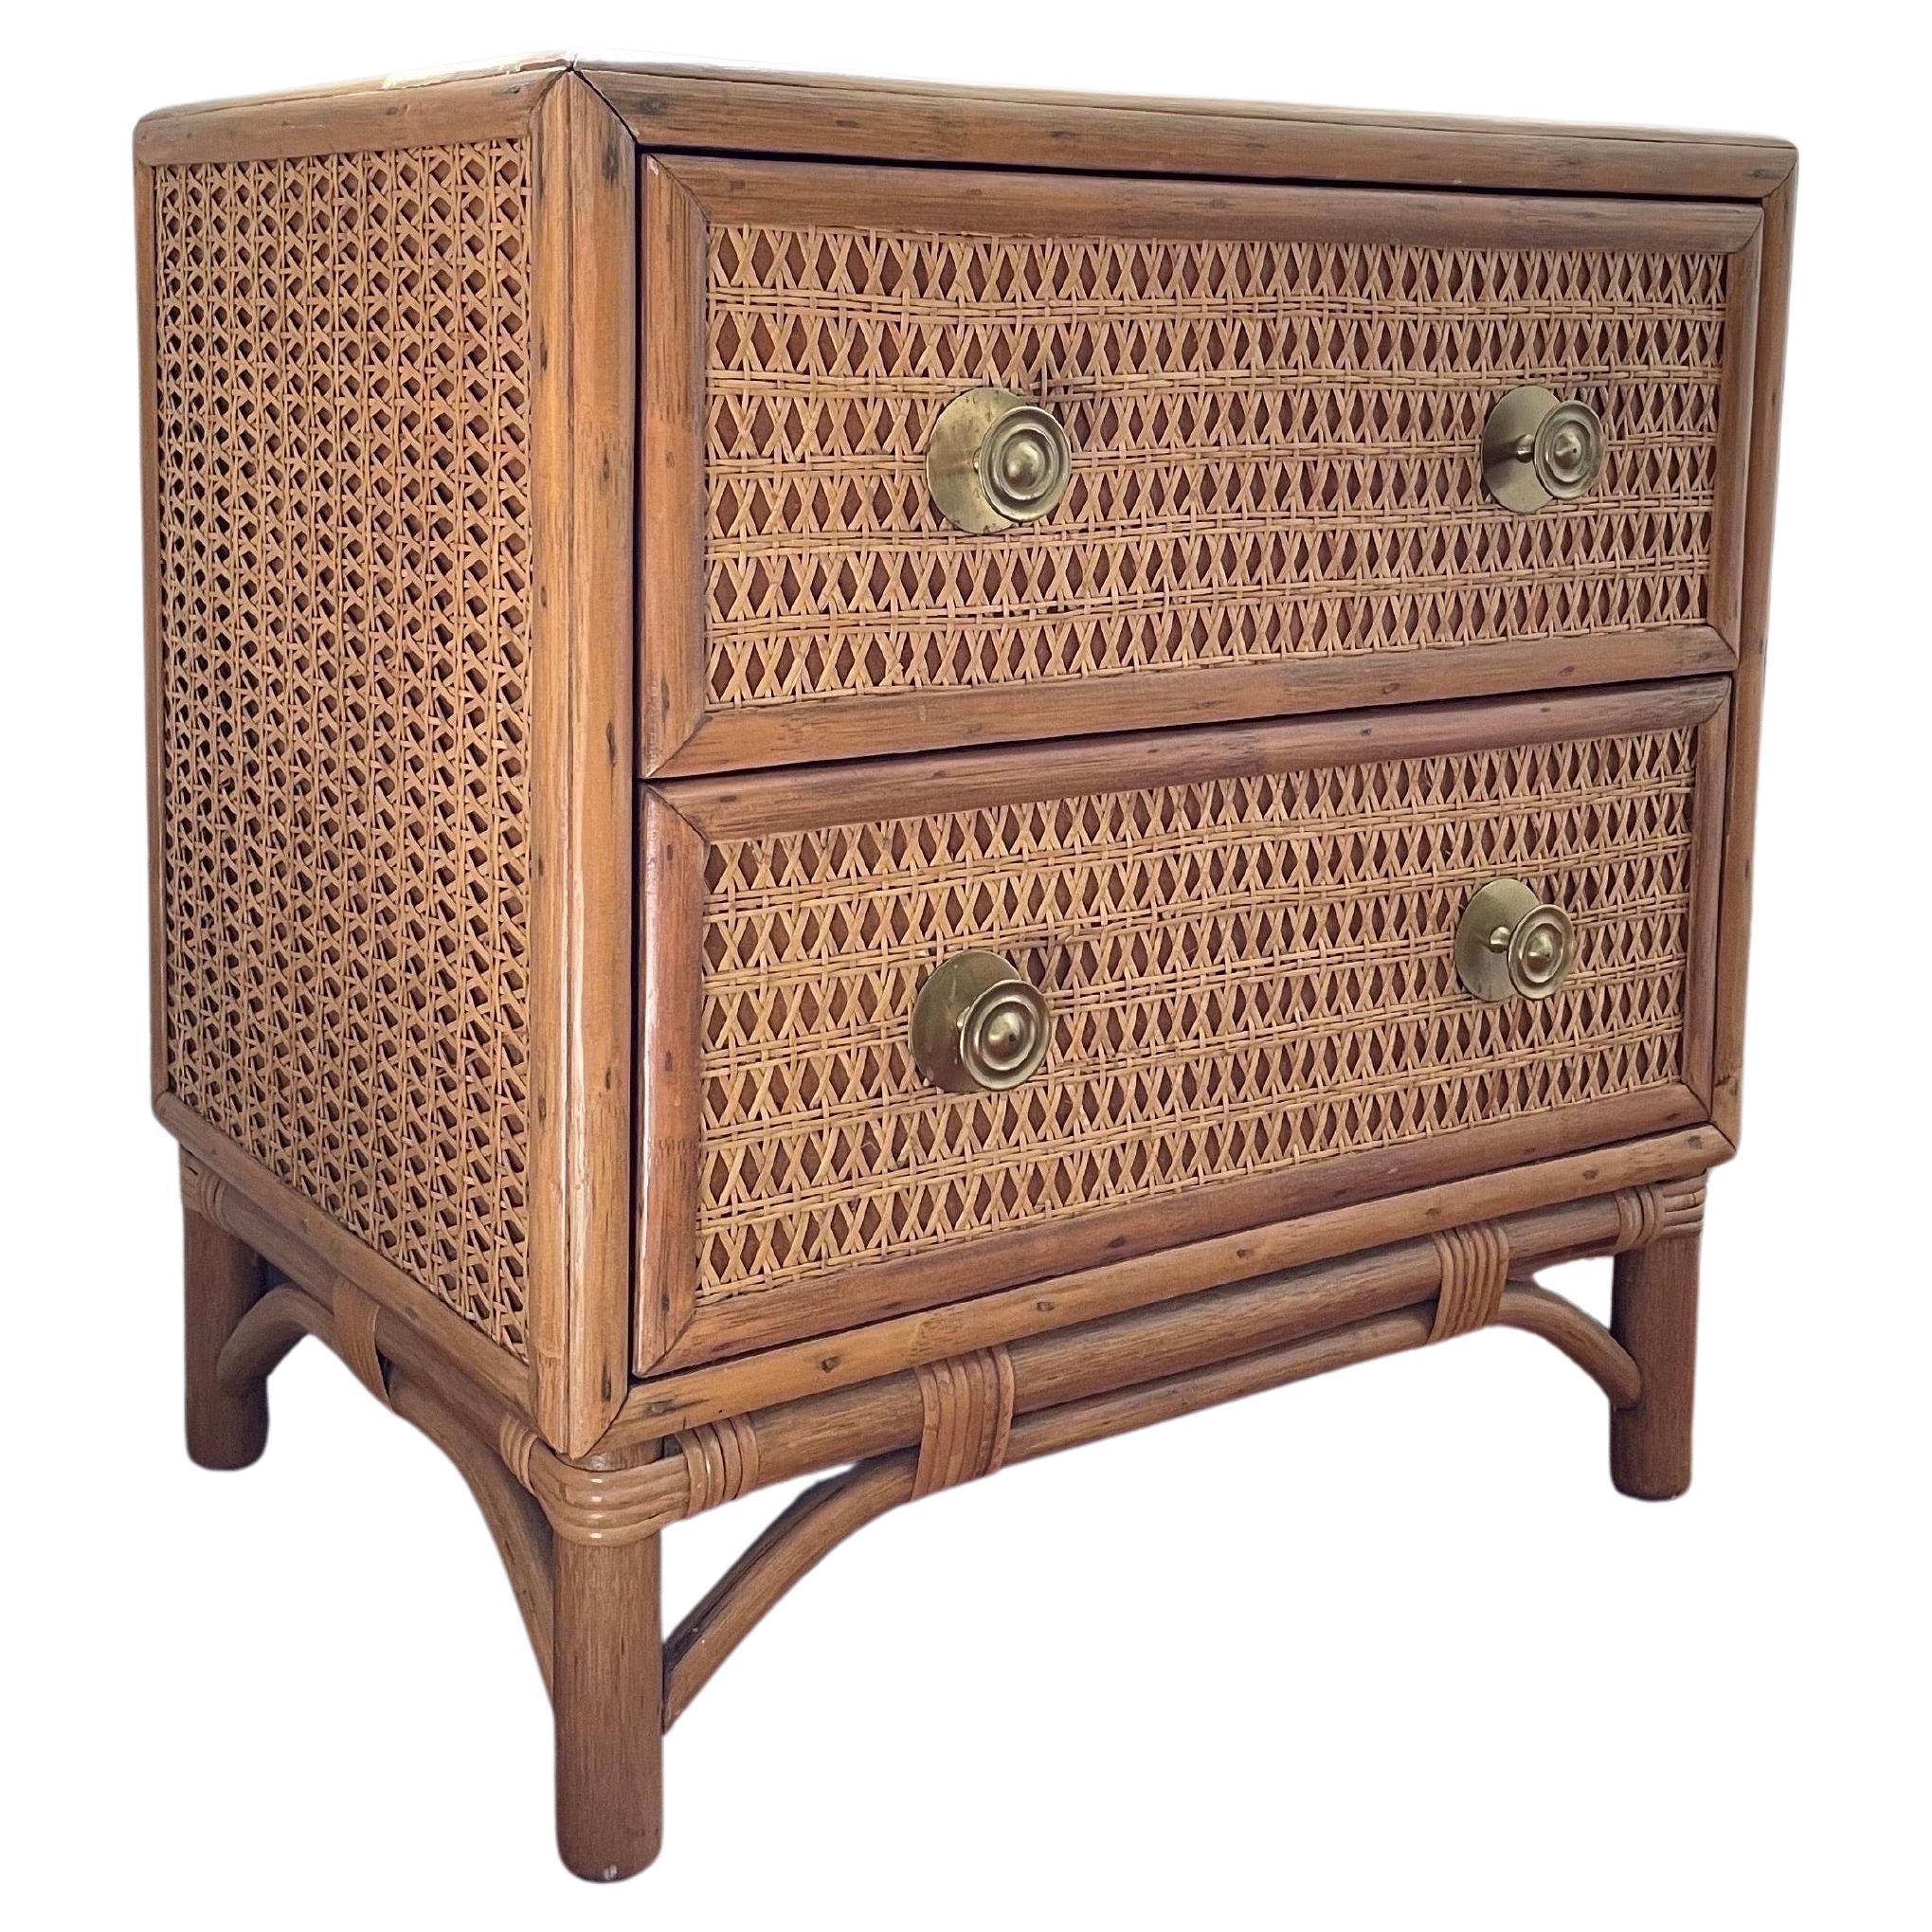 Midcentury Rattan and Cane Side Table Nightstand For Sale